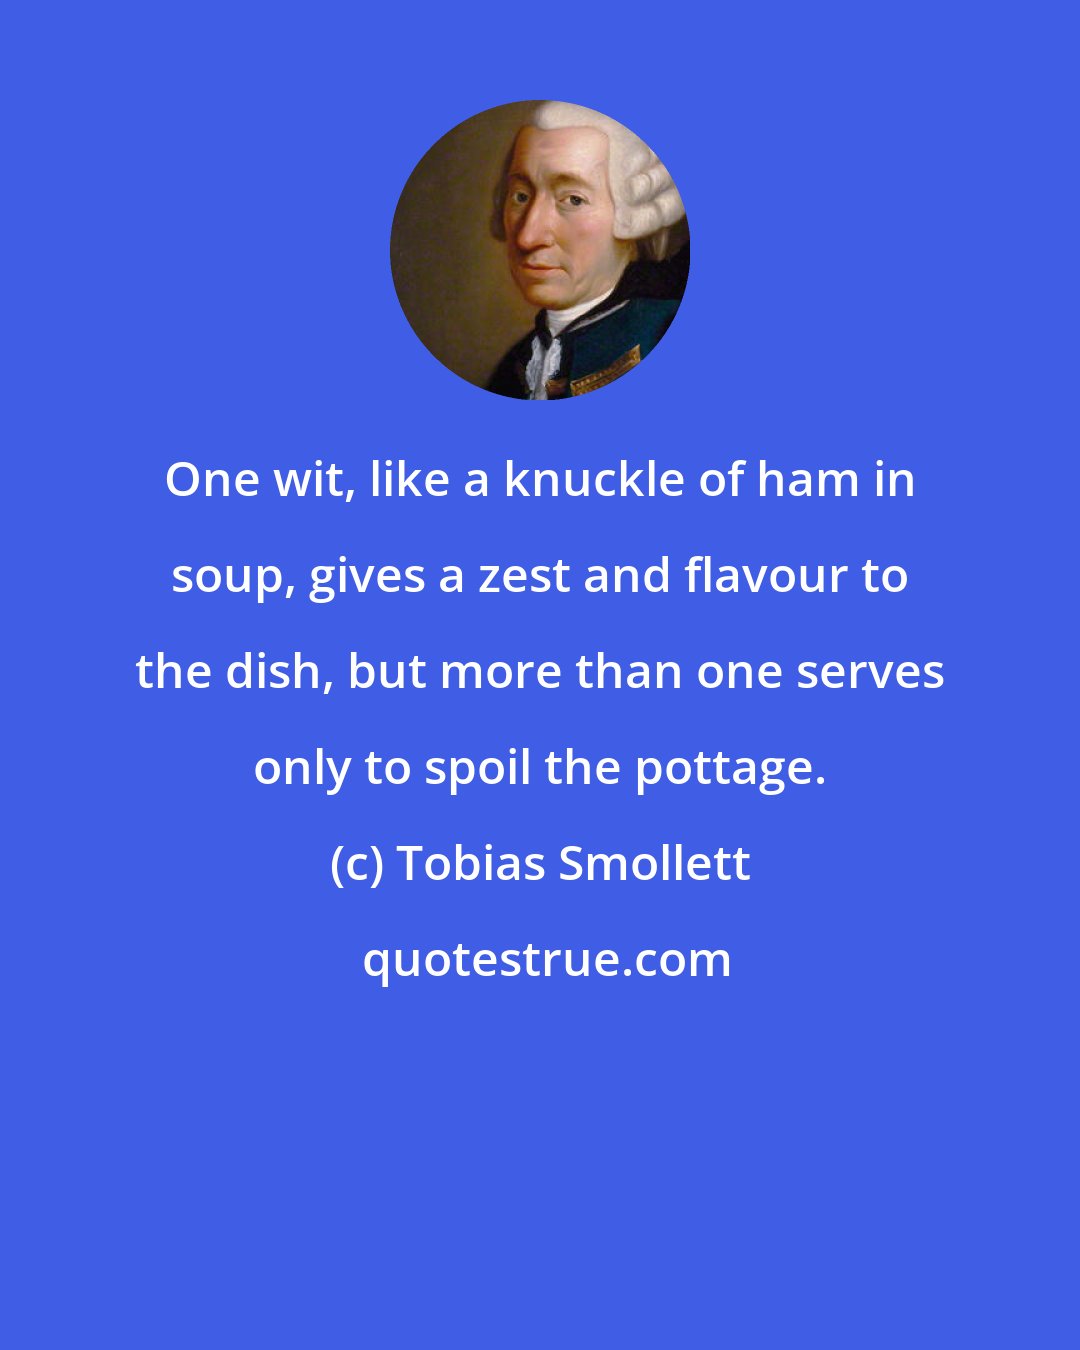 Tobias Smollett: One wit, like a knuckle of ham in soup, gives a zest and flavour to the dish, but more than one serves only to spoil the pottage.